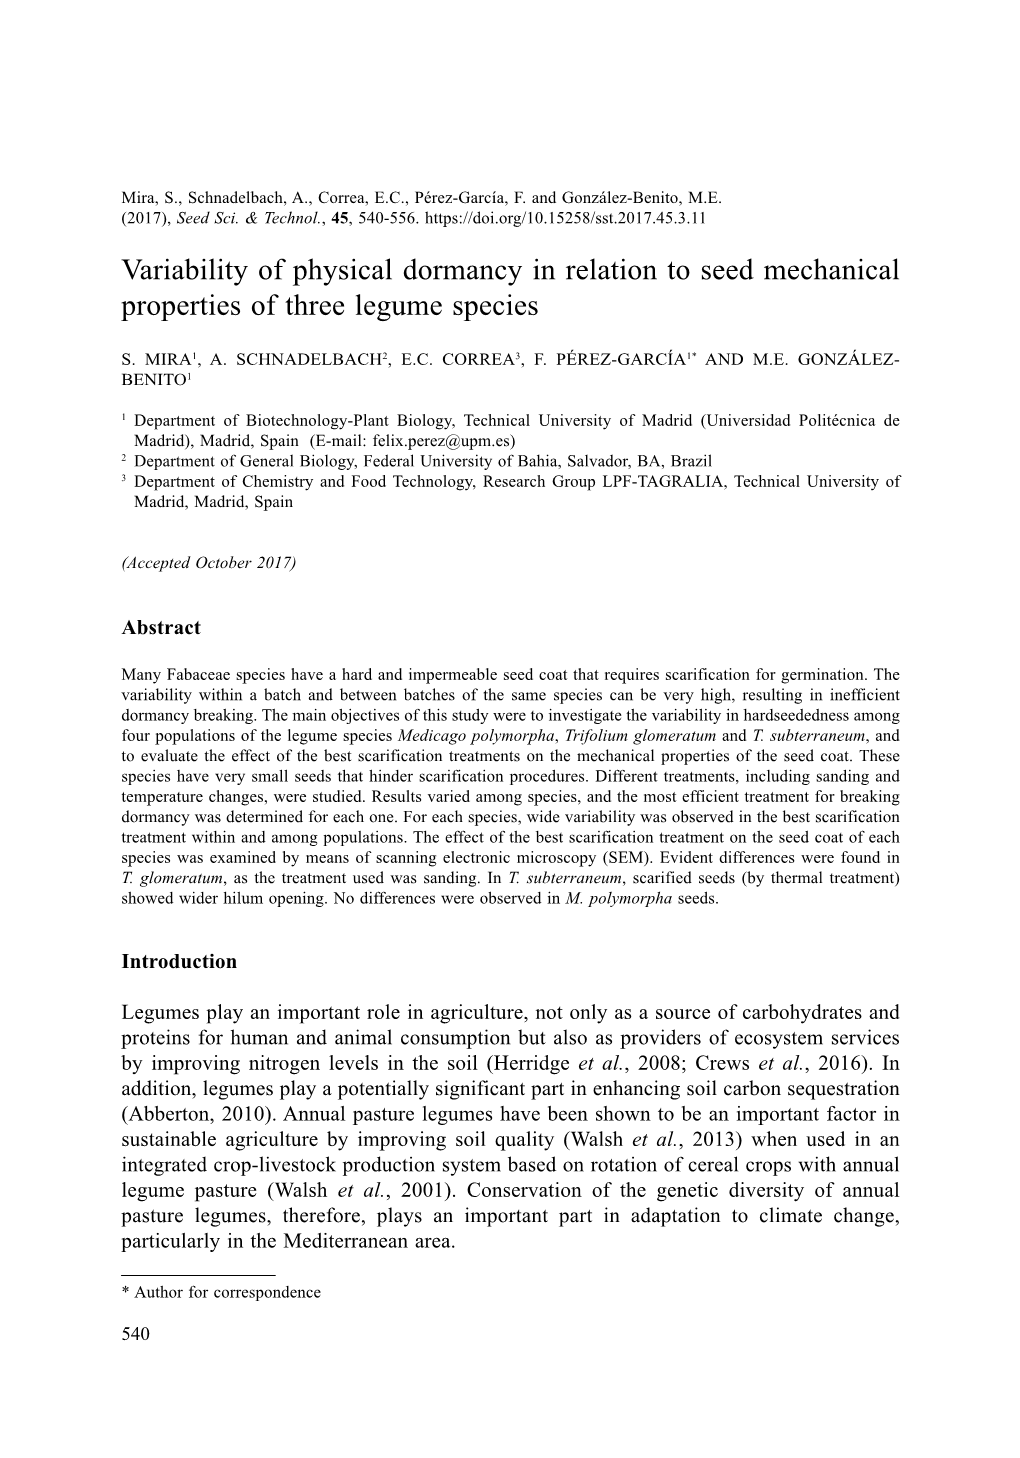 Variability of Physical Dormancy in Relation to Seed Mechanical Properties of Three Legume Species